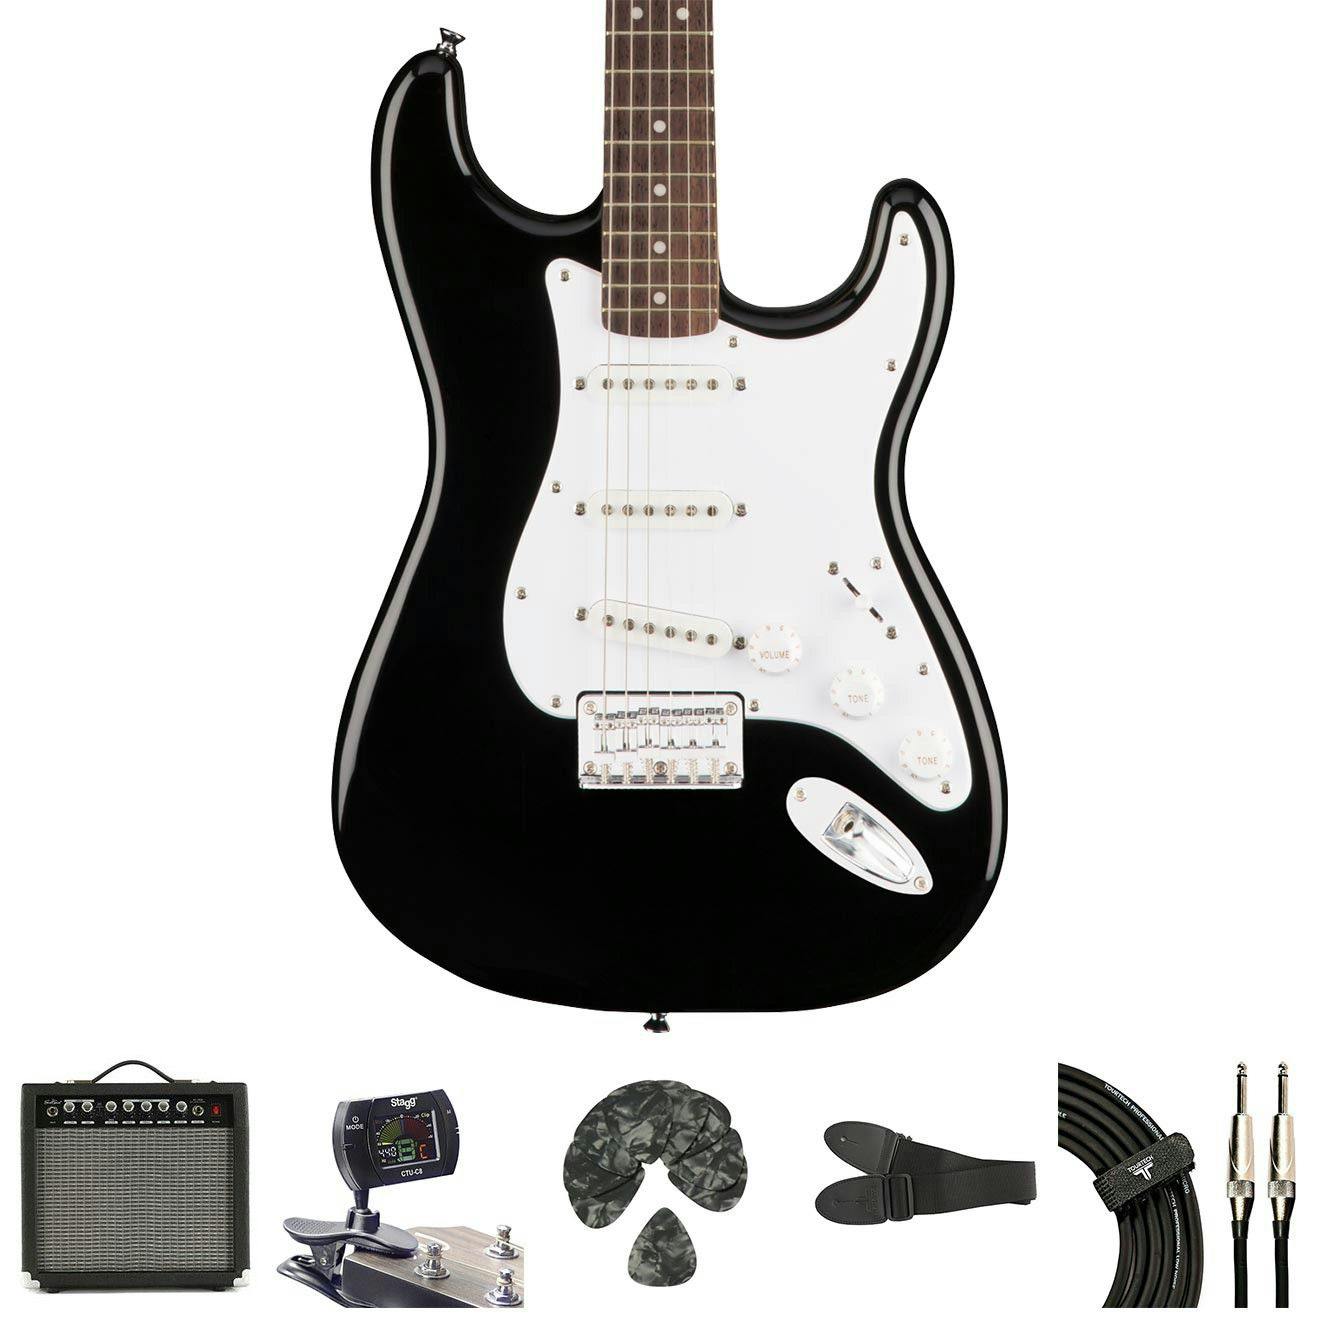 Squier Bullet Stratocaster HT in Black Starter Pack with Amp & Accessories